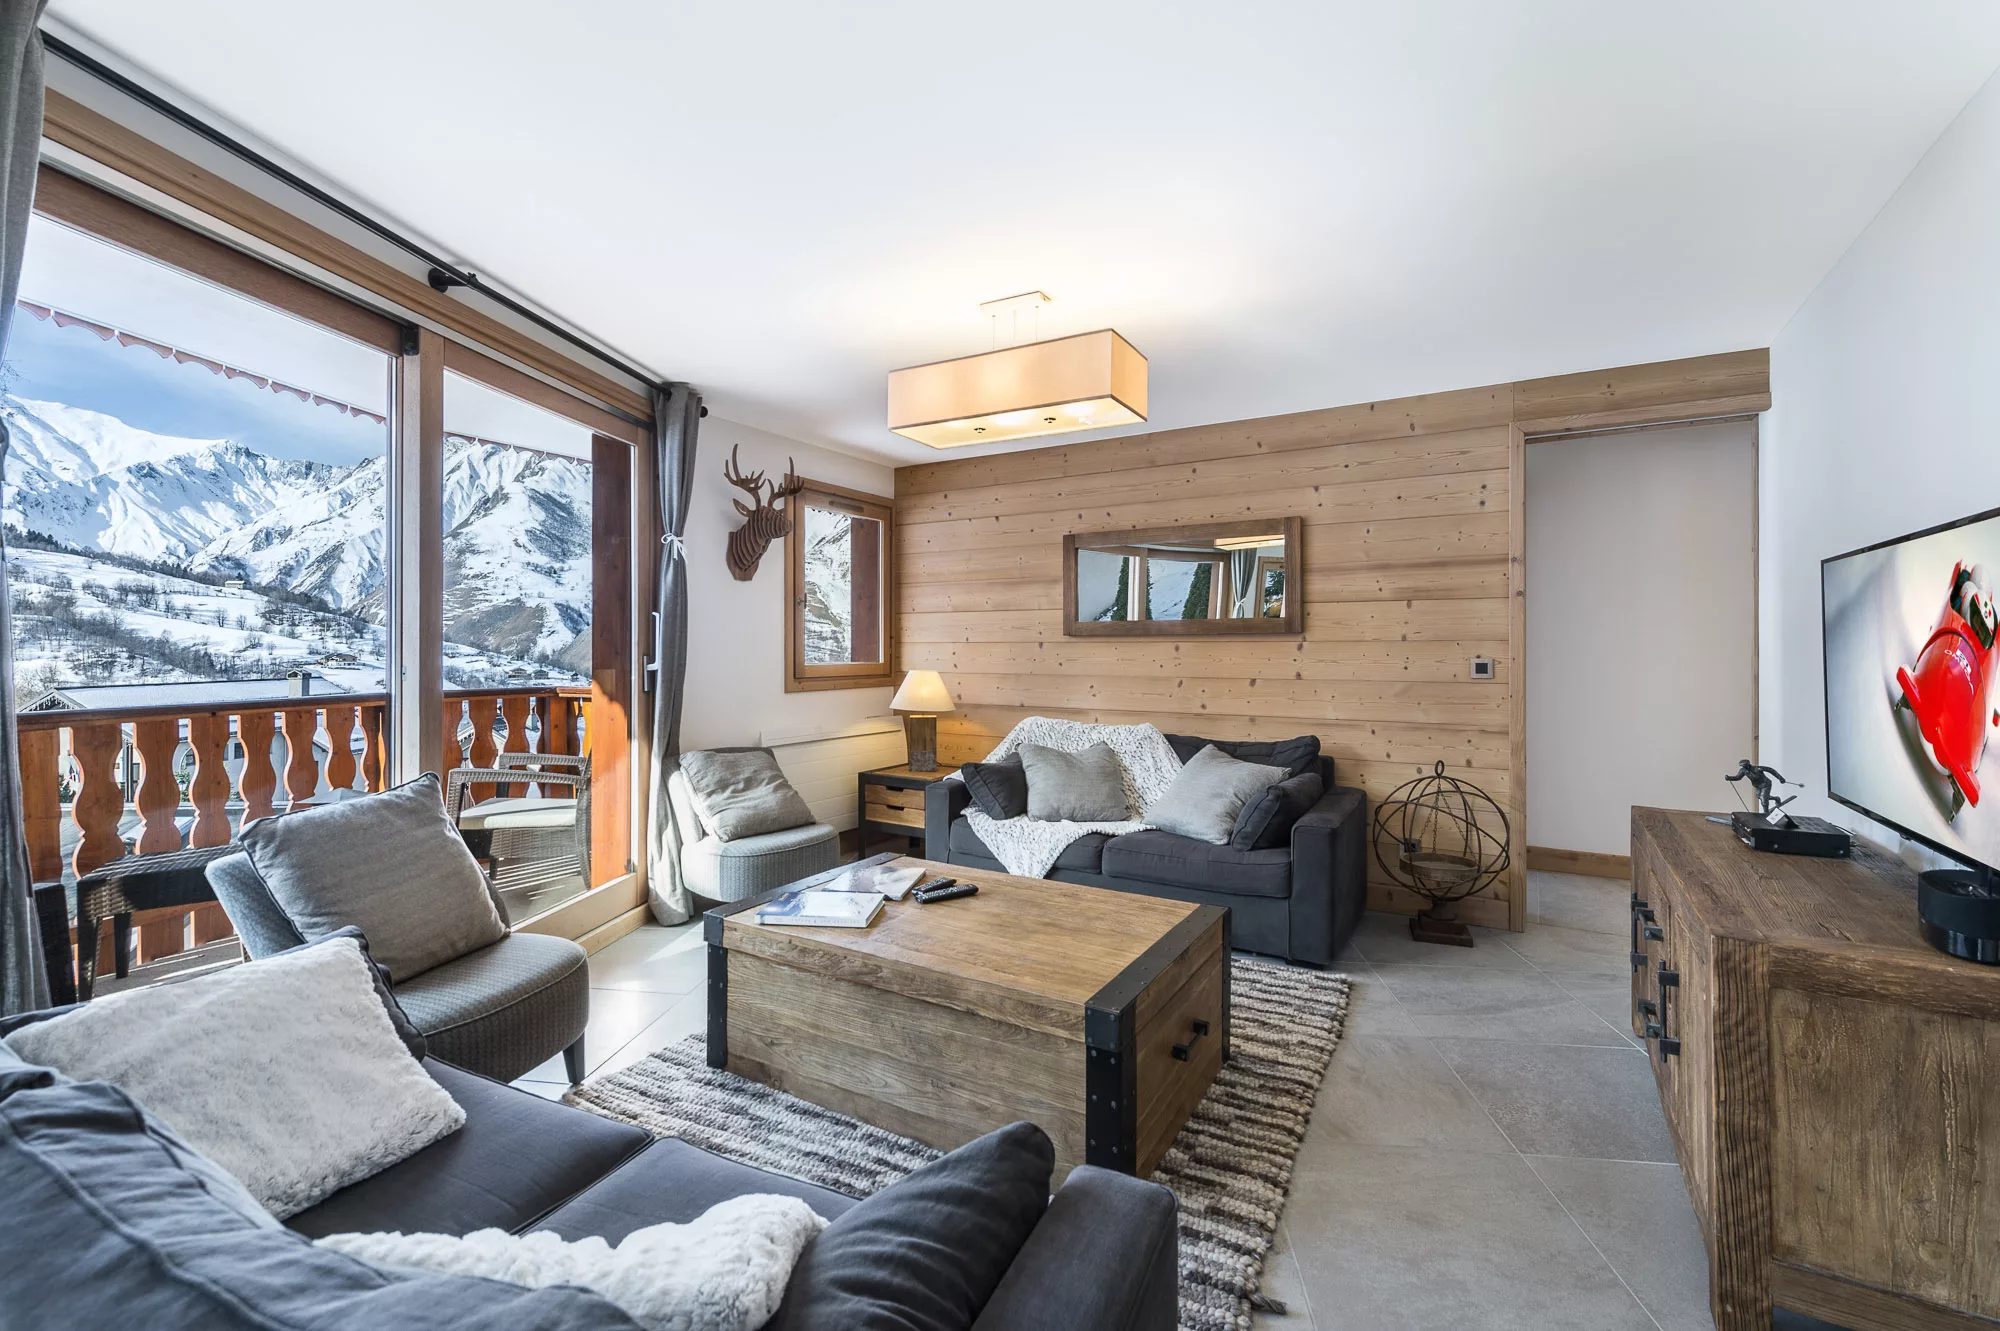 Our *NEW* Prestige chalets – Luxury apartments with ski-in ski-out location